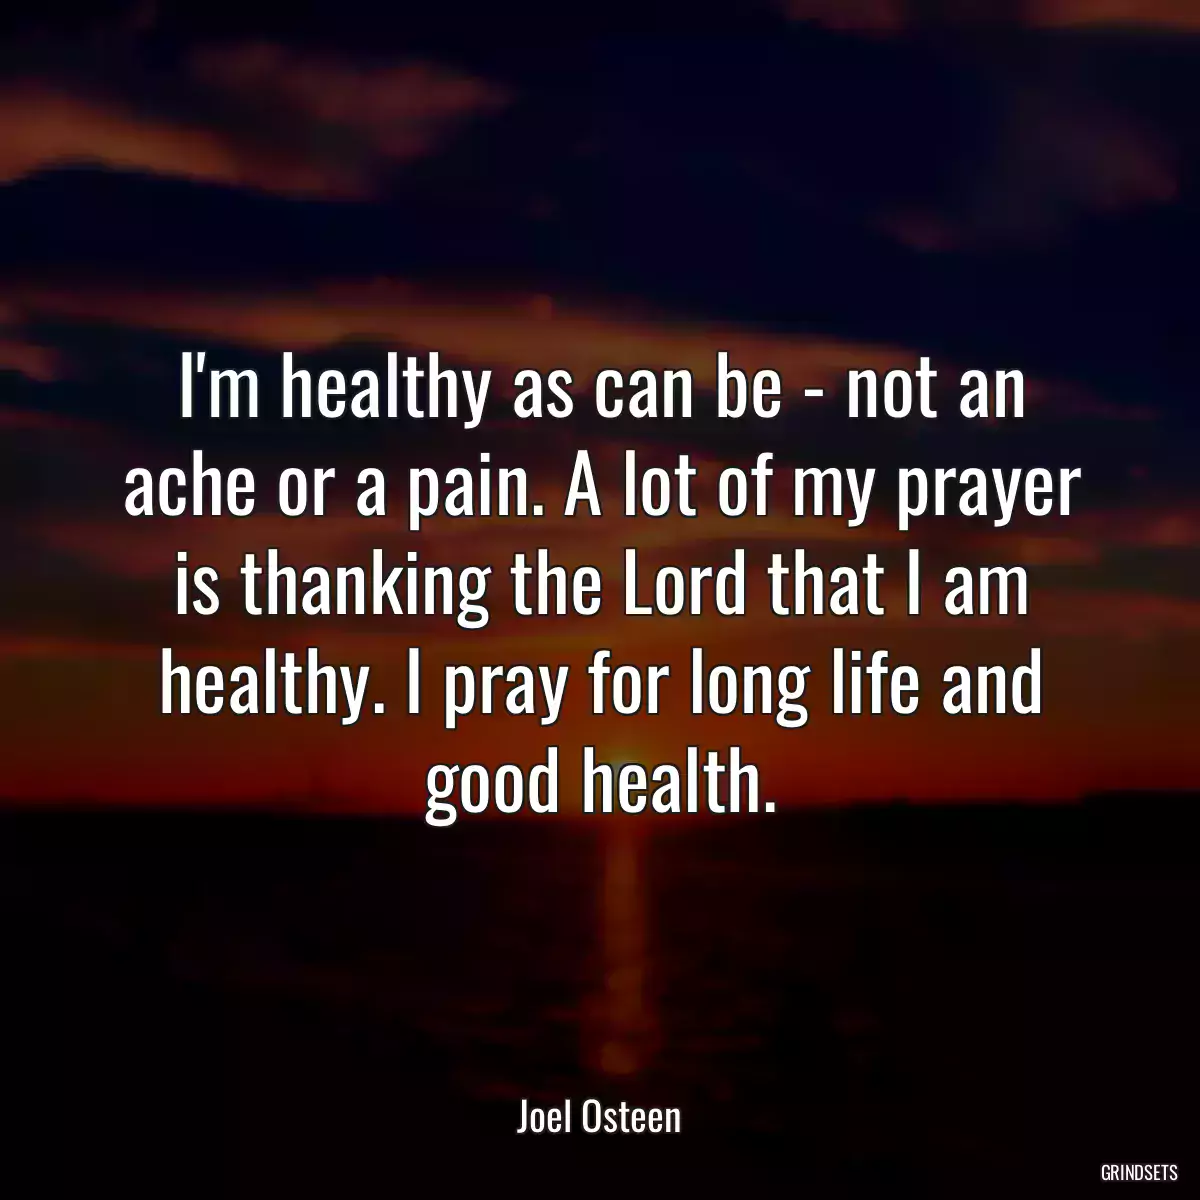 I\'m healthy as can be - not an ache or a pain. A lot of my prayer is thanking the Lord that I am healthy. I pray for long life and good health.